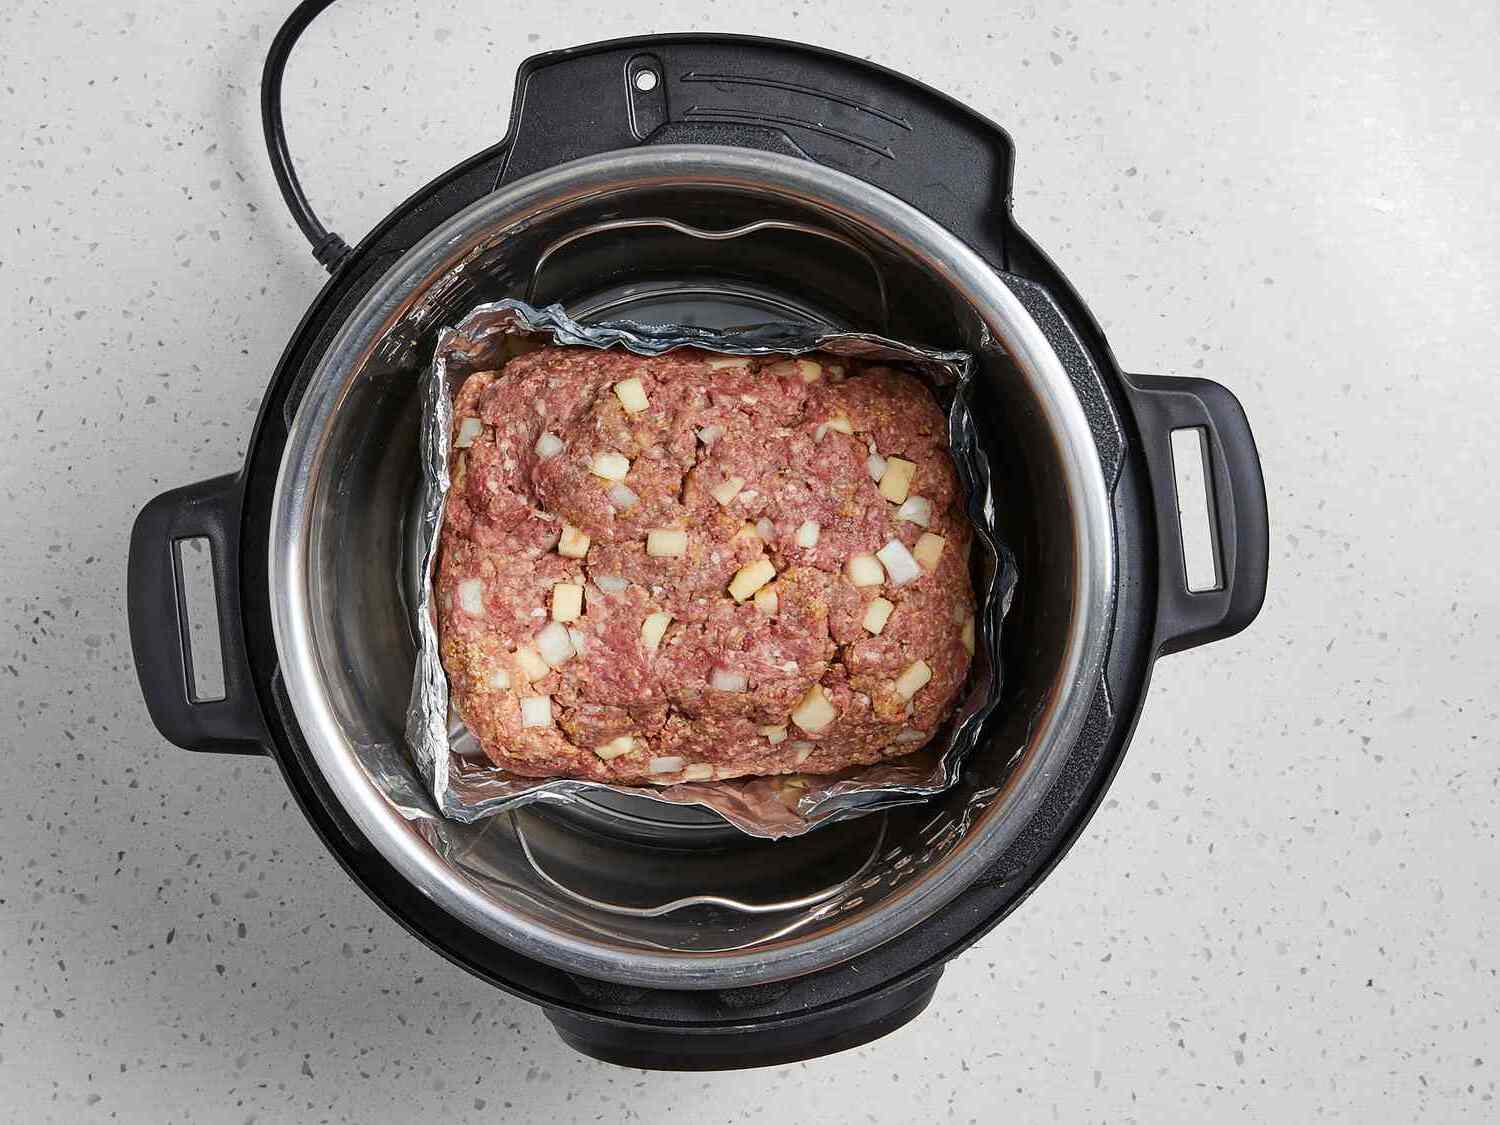 How to Make Meatloaf in the Instant Pot/Pressure Cooker